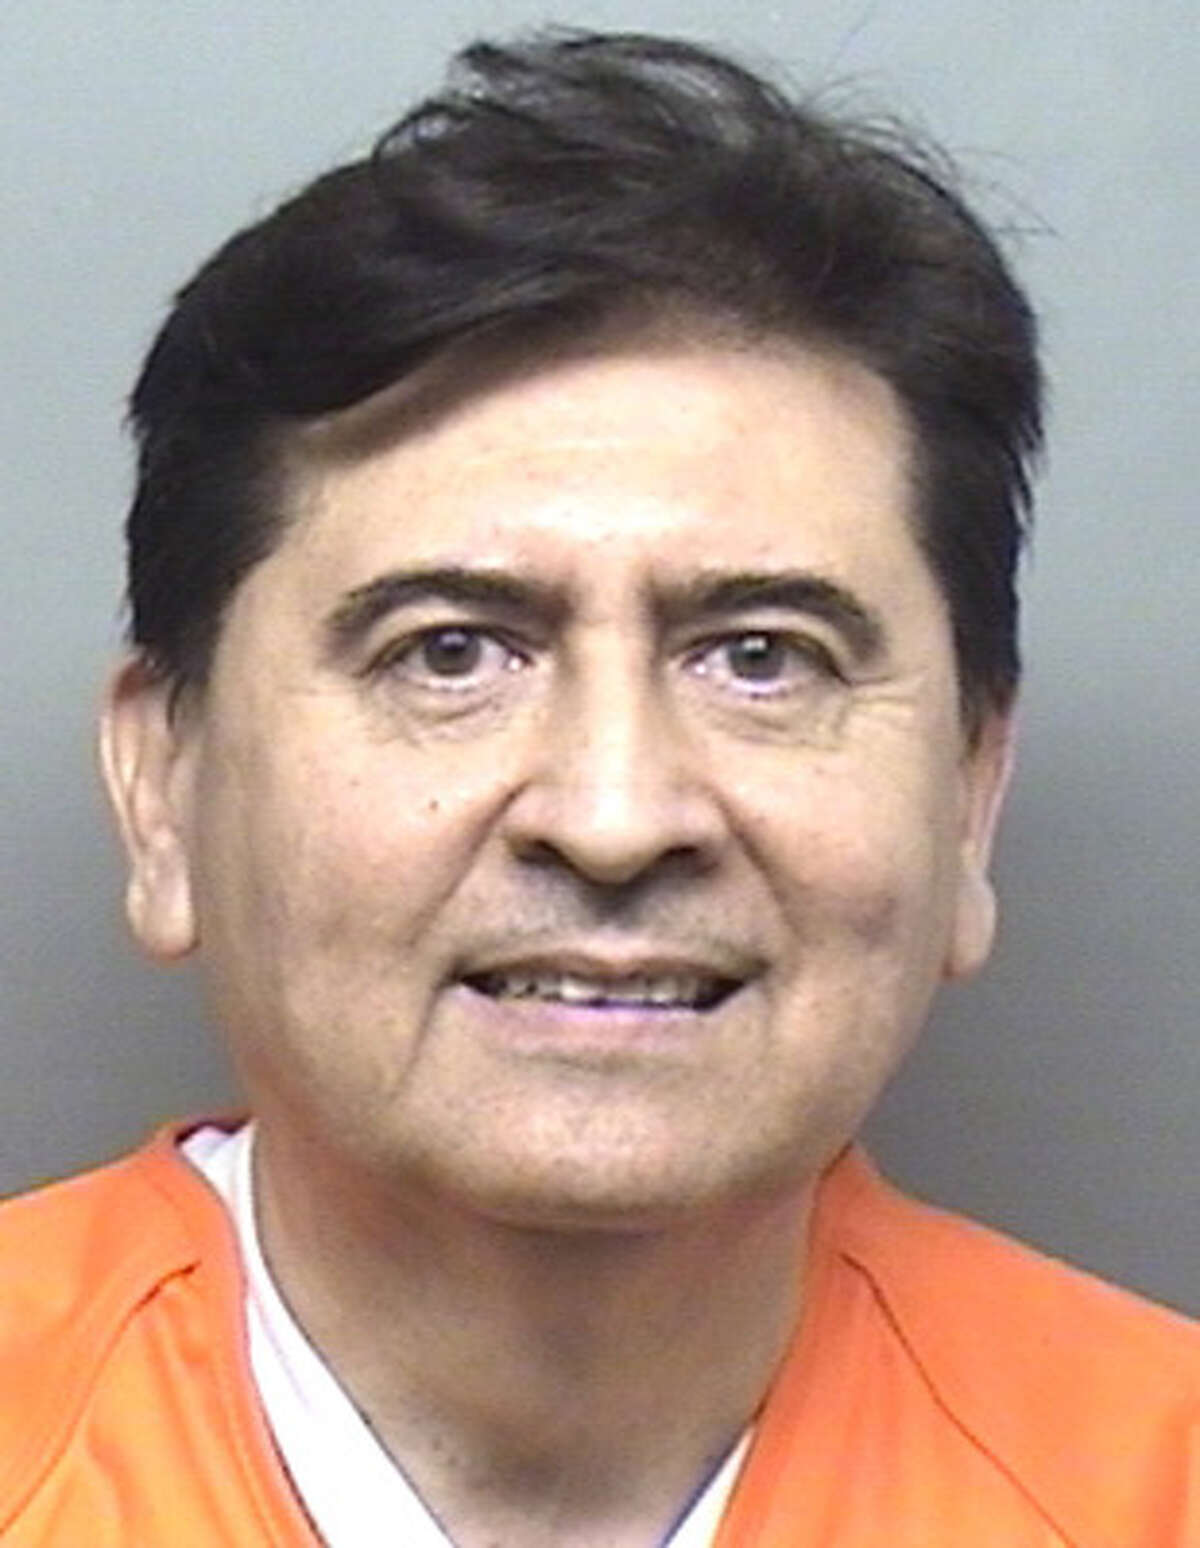 Jesus "Chuy" Garza, Webb County Court at Law II judge, was booked Thursday at the Webb County Jail. He posted a $2,500 bond.